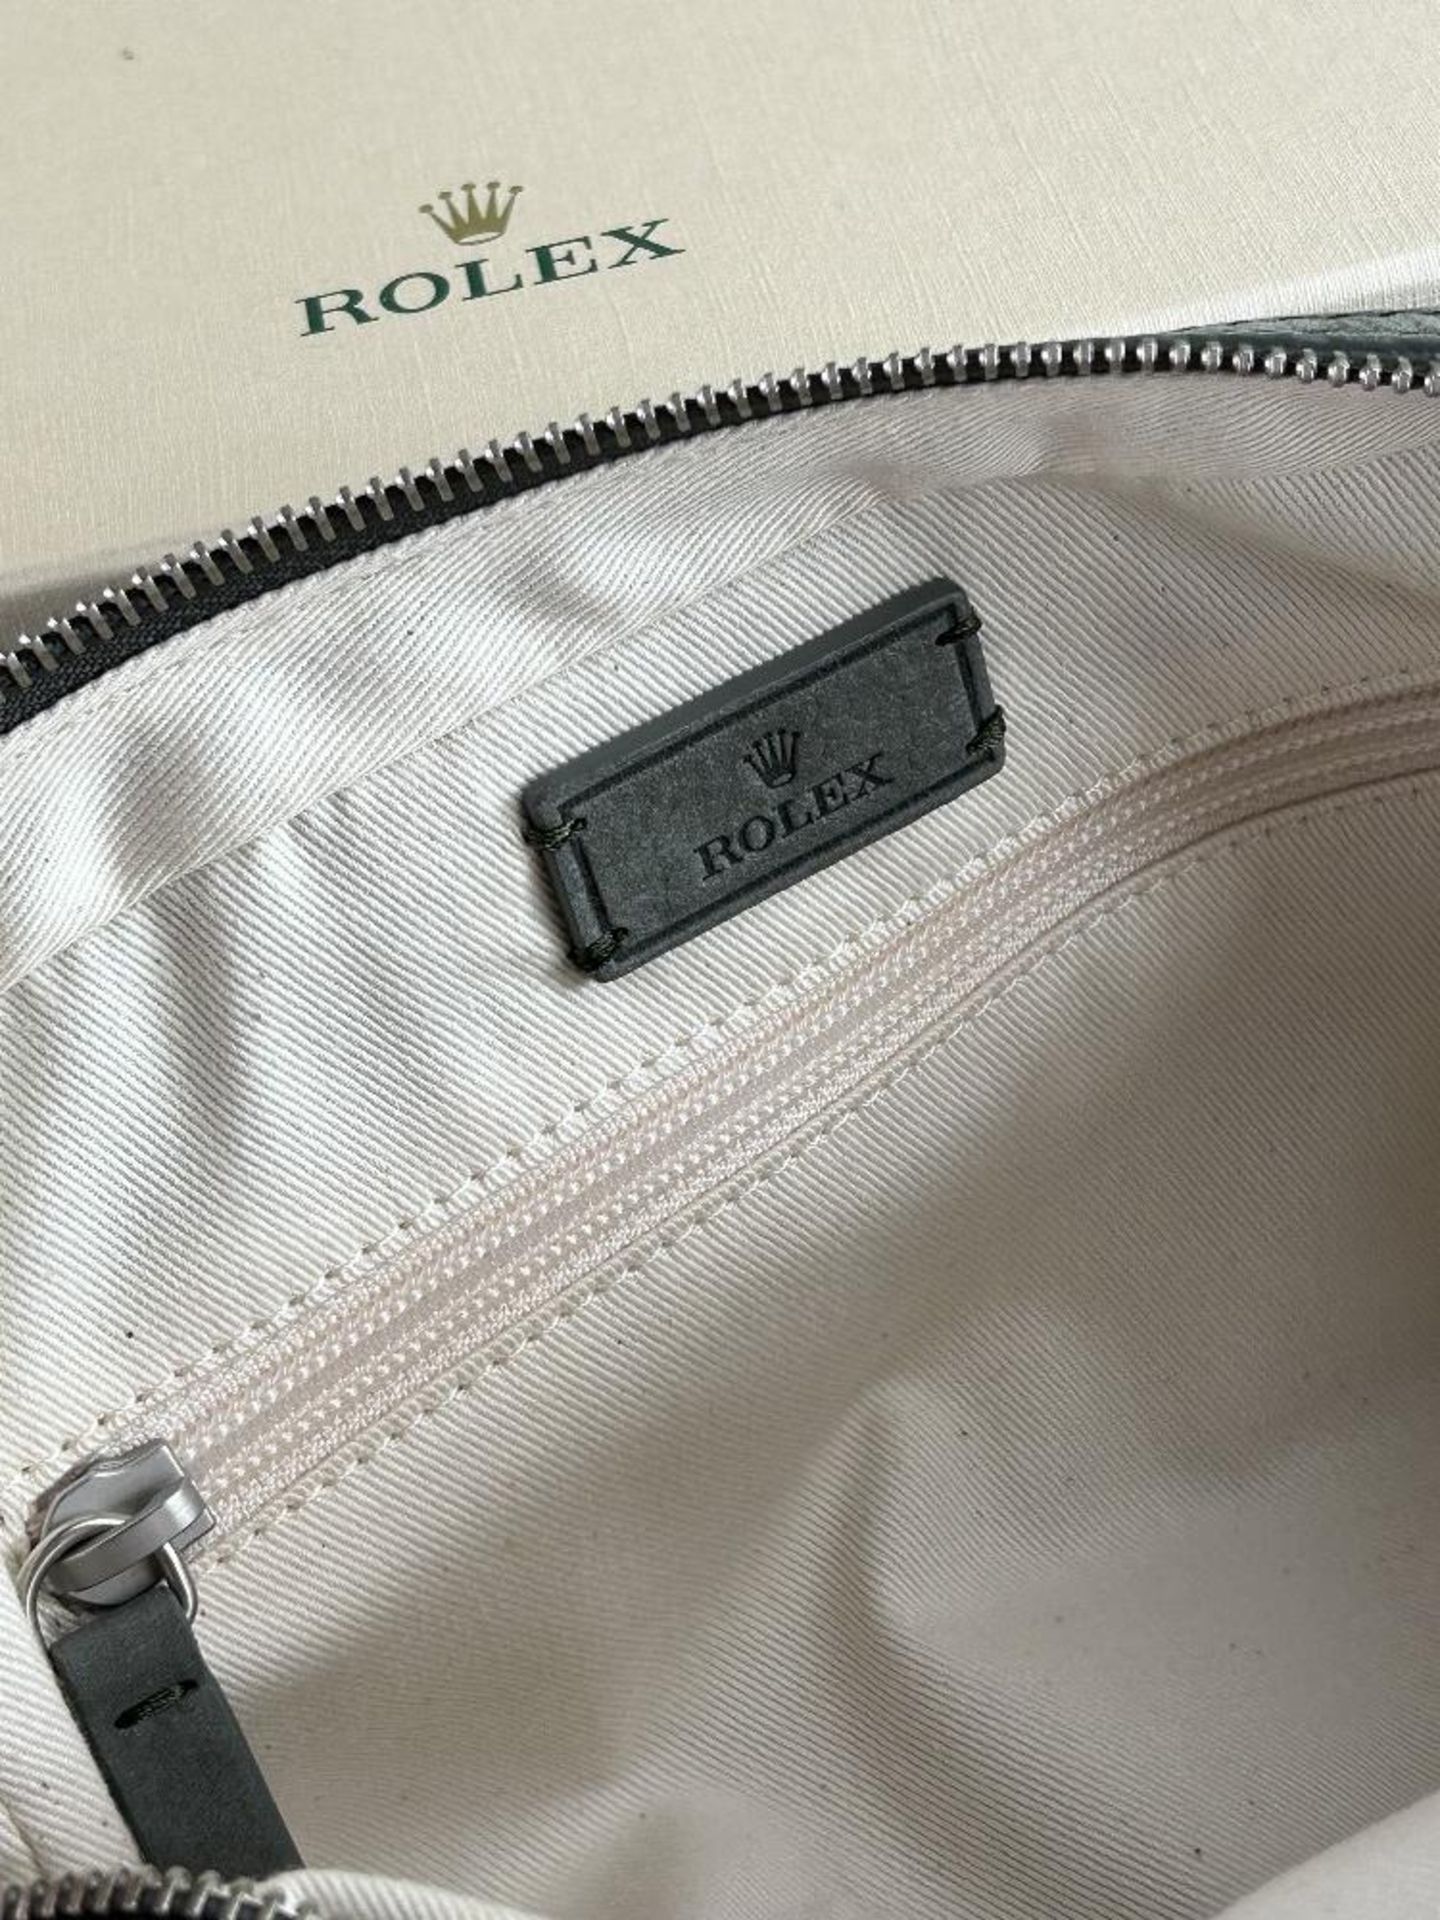 Rolex Official Merchandise Overnight Bag-New Example - Image 7 of 9